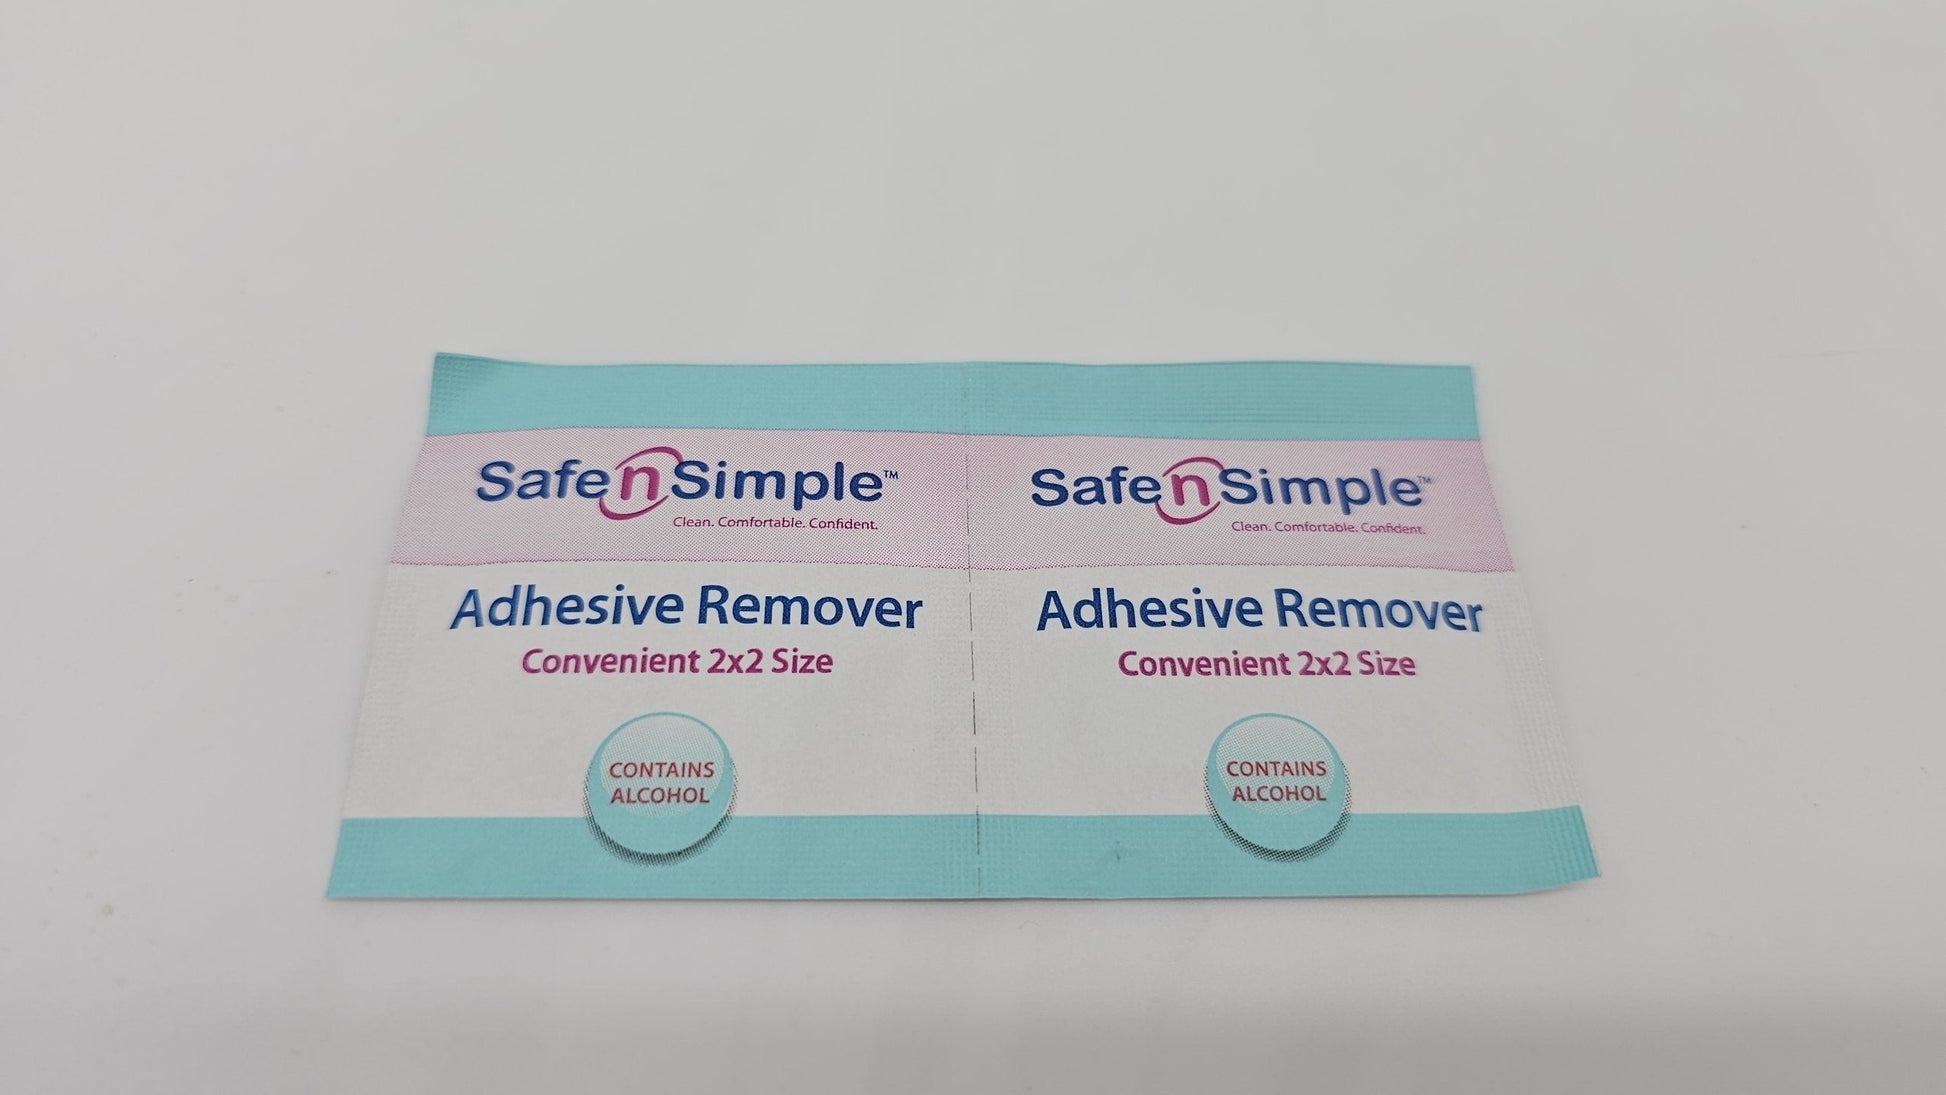 Safe n' Simple Adhesive Remover for Skin - 5x7 75 Wipes - Stoma Adhesive  Remover Wipes - Alcohol Free Wipes for Sensitive Skin - No Sting Adhesive  Remover Wipes